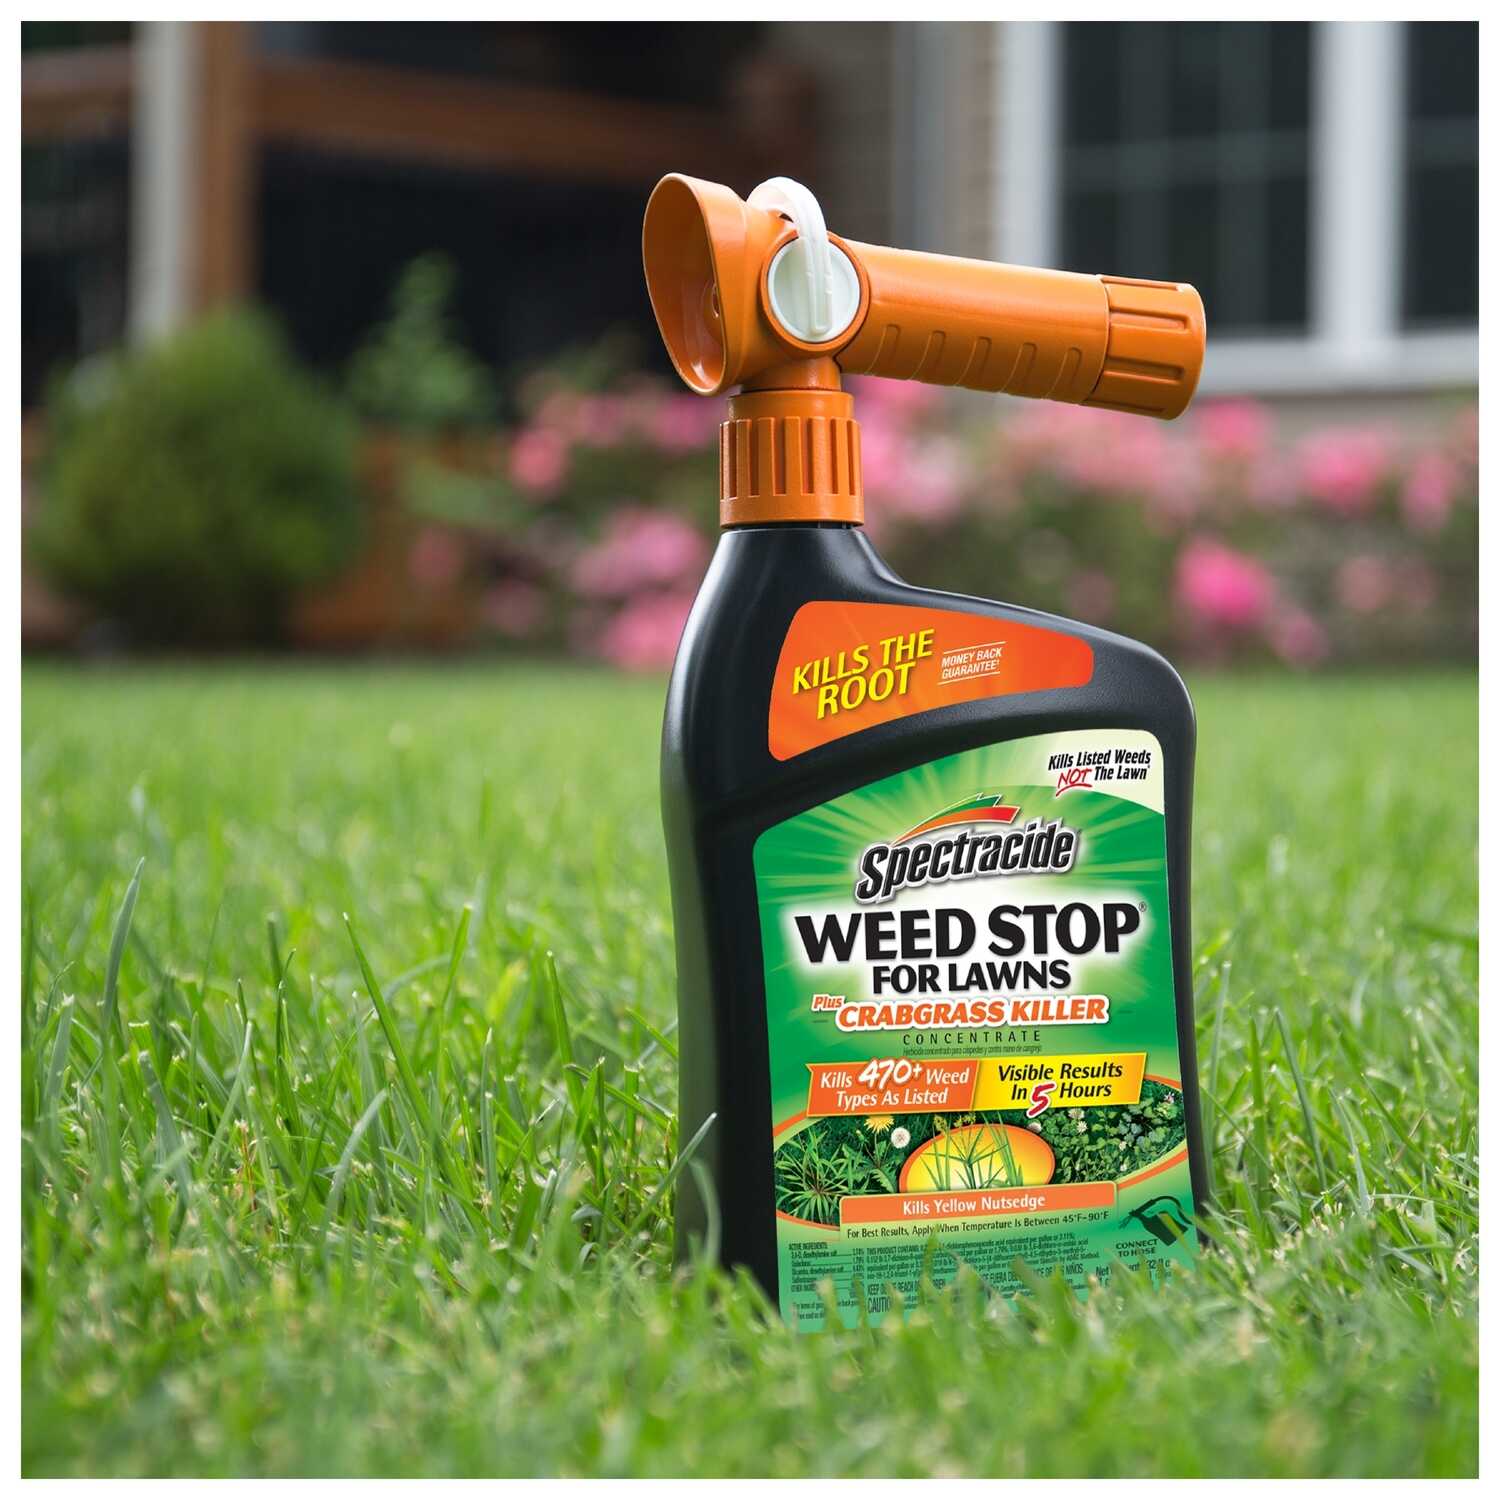 Spectracide Weed Stop Weed and Crabgrass Killer RTS Hose